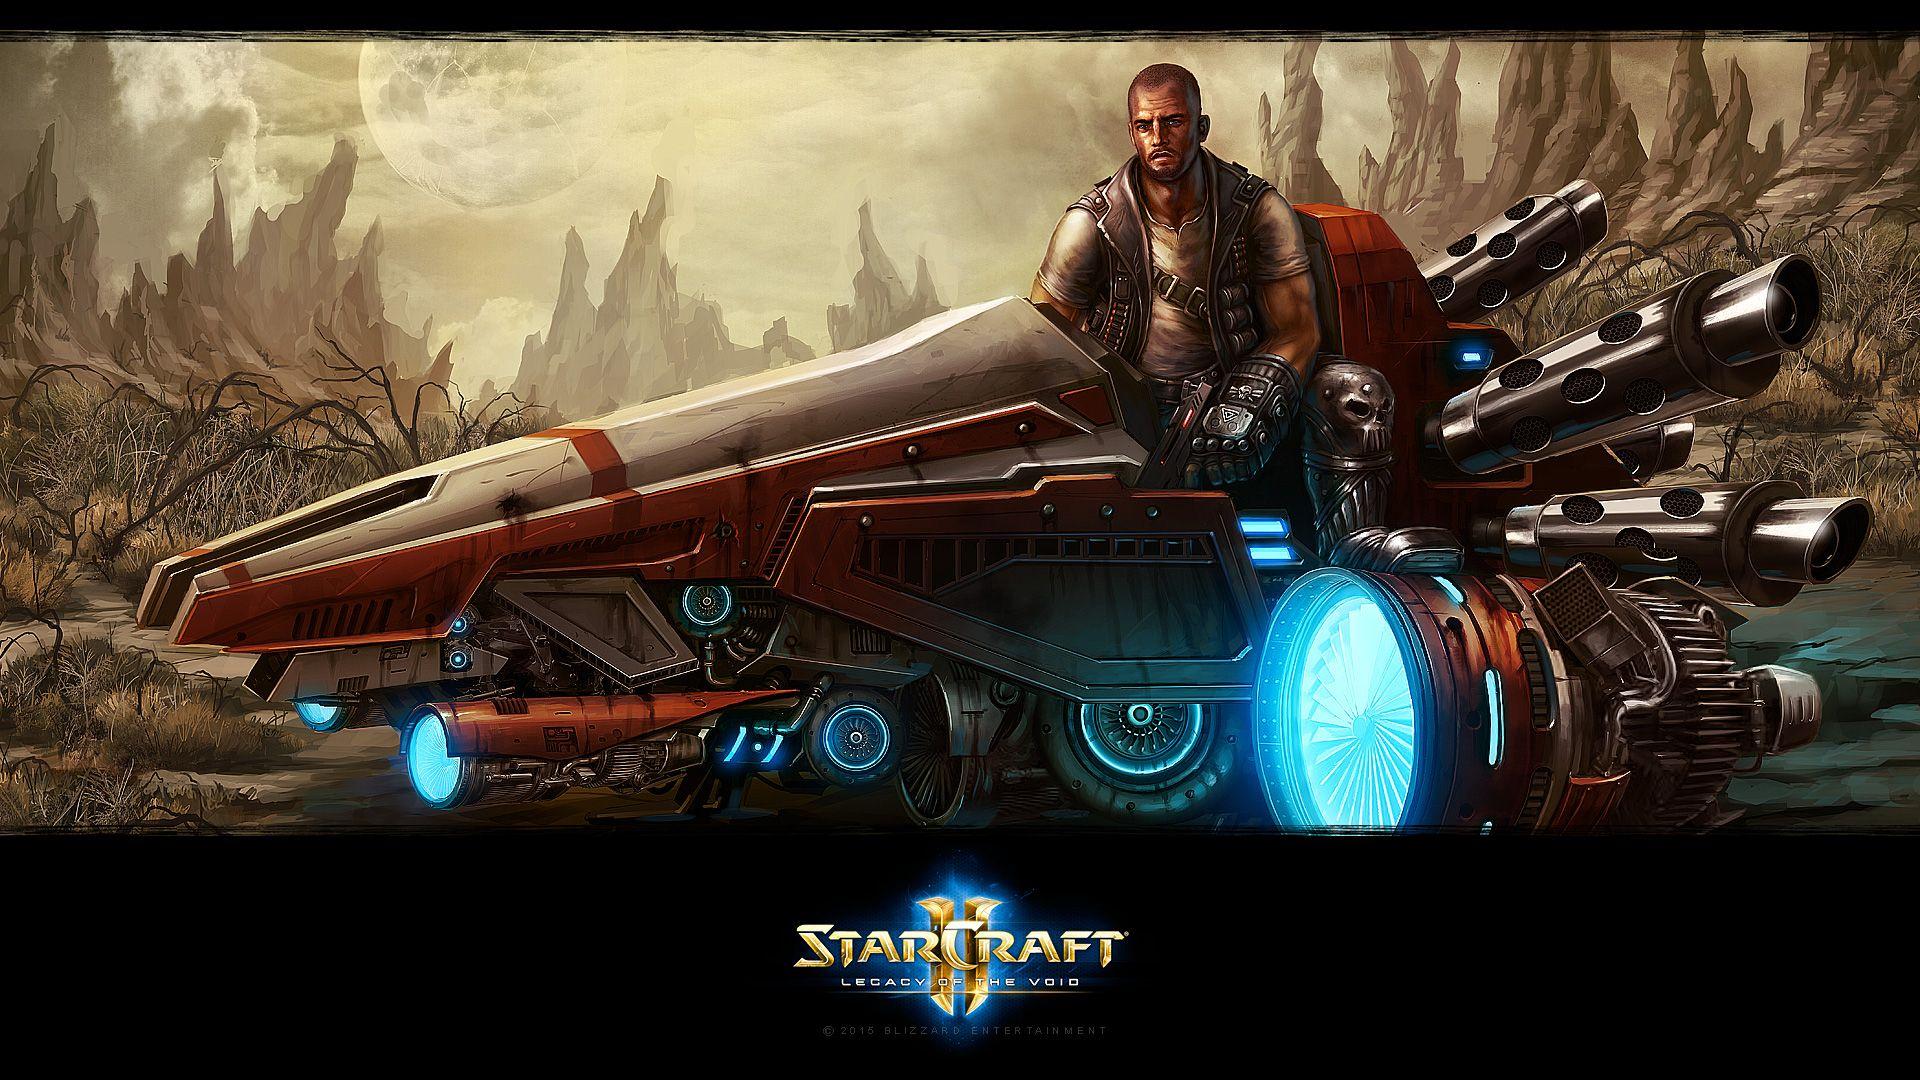 Starcraft 2 Wallpapers Top Free Starcraft 2 Backgrounds